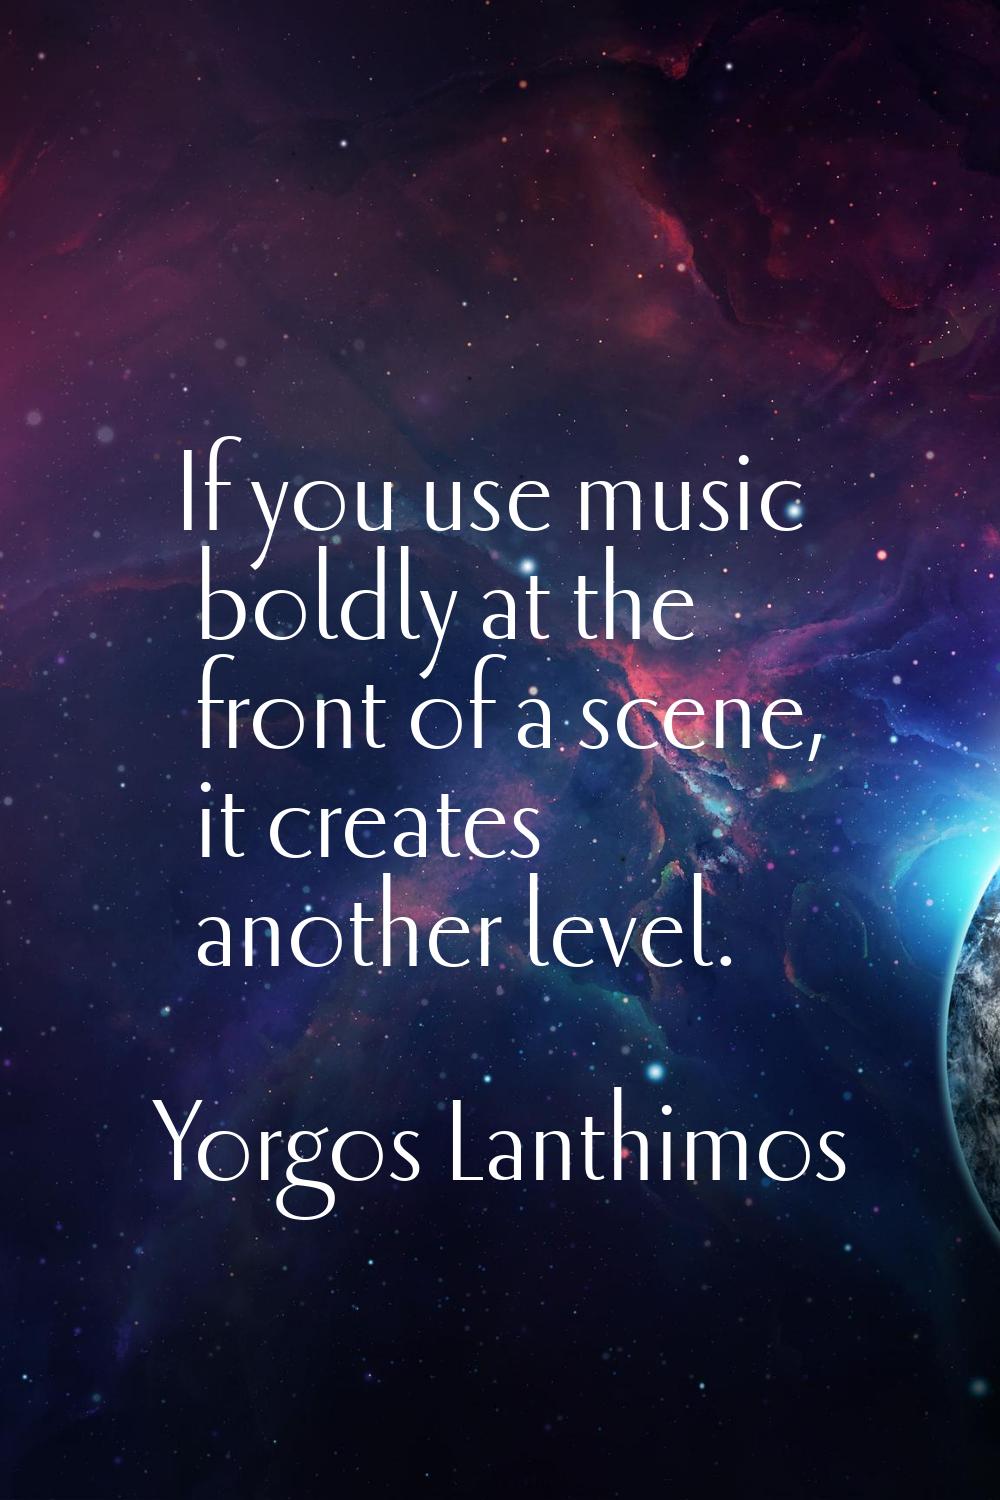 If you use music boldly at the front of a scene, it creates another level.